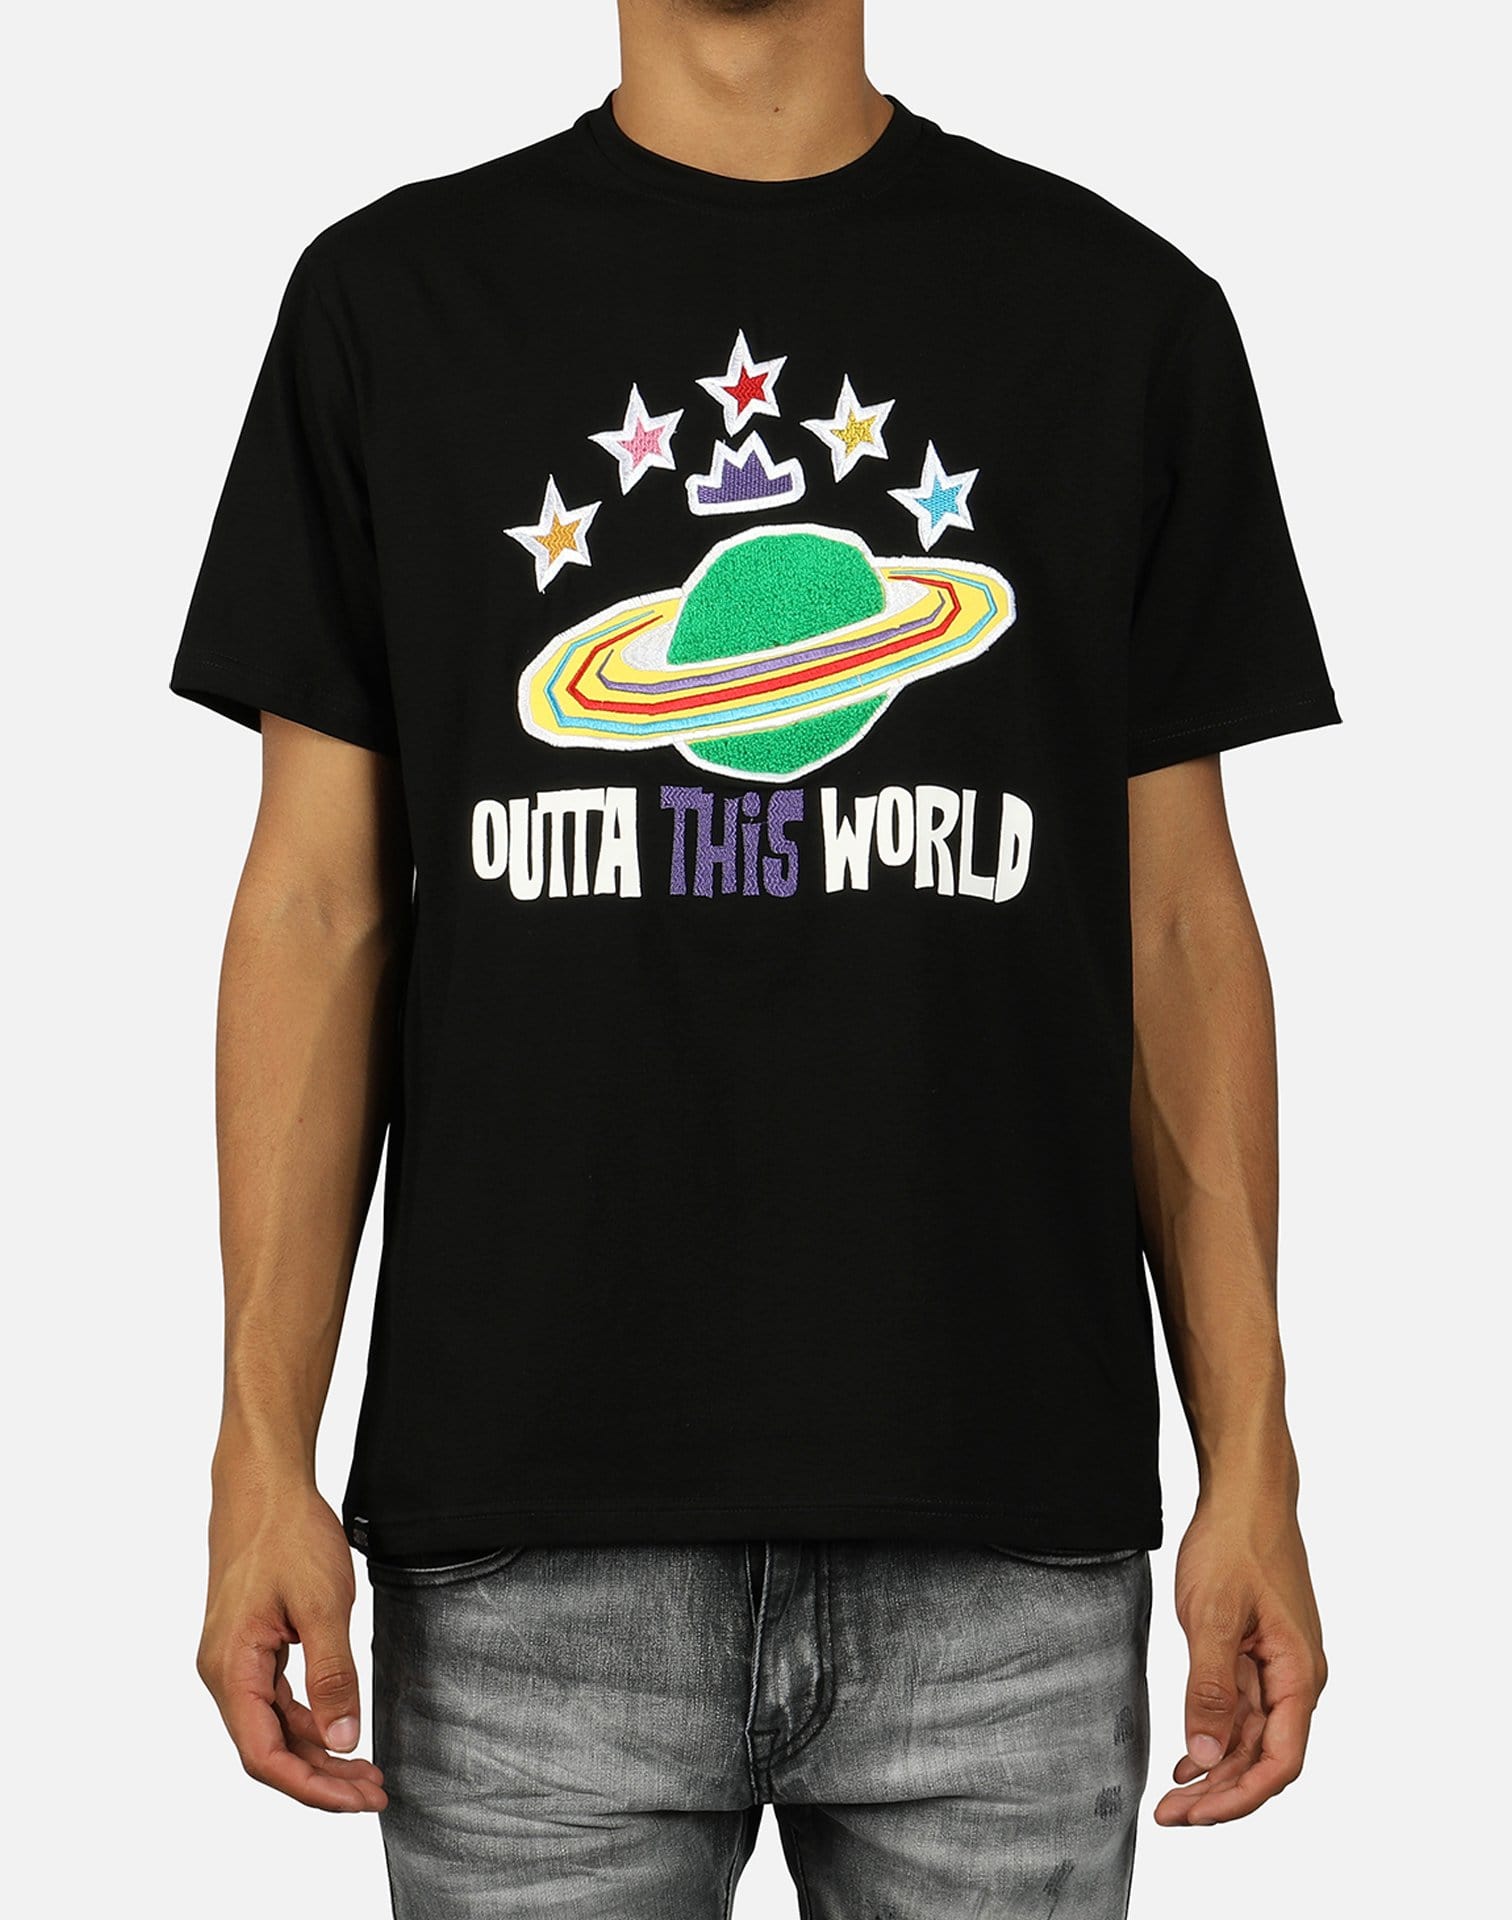 K and S Men's Outta This World Tee